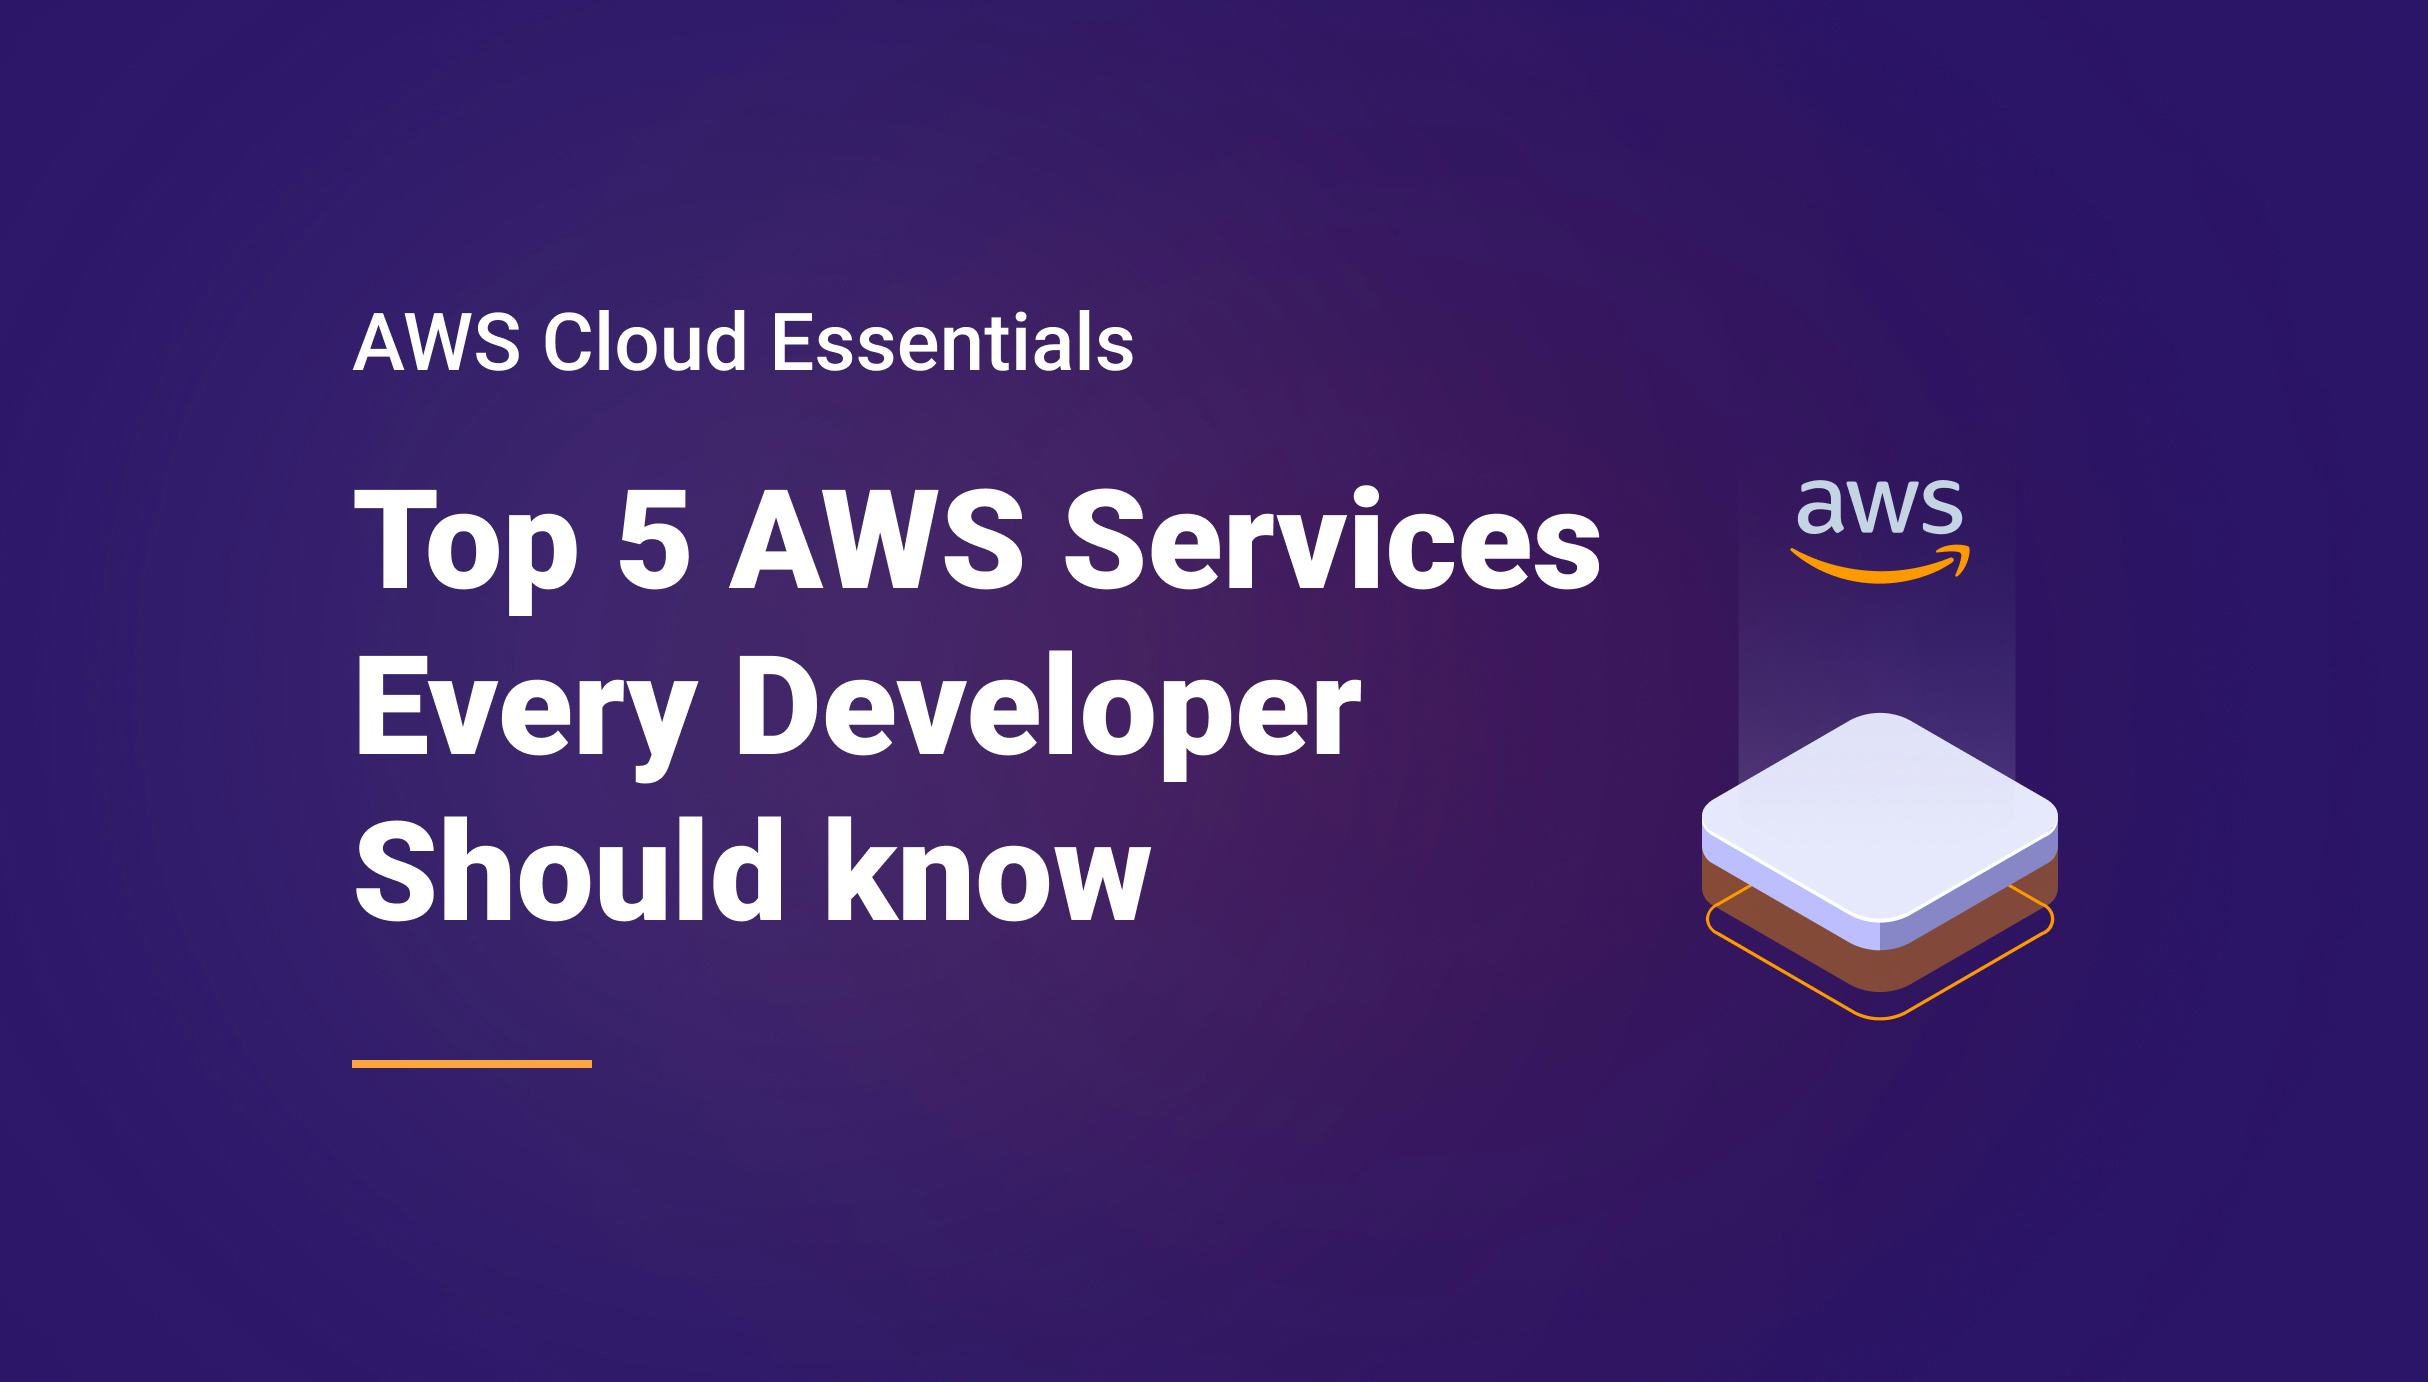 Top 5 AWS Services Every Developer Should know